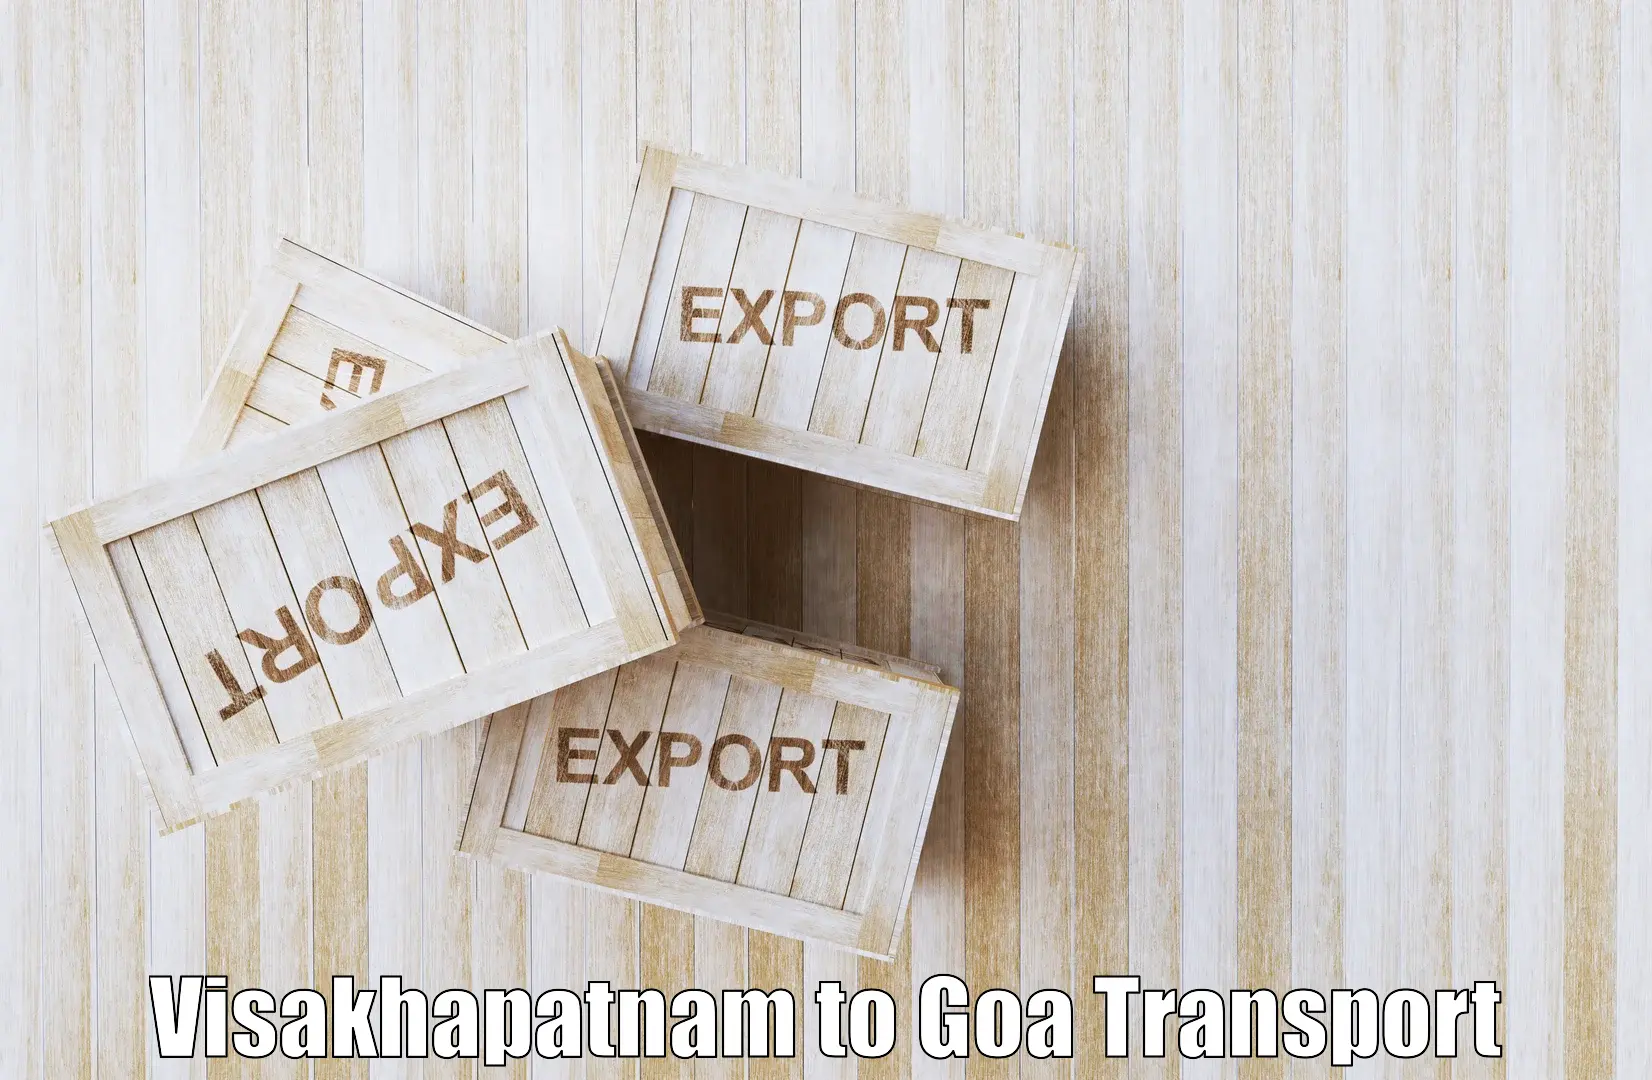 Nearby transport service Visakhapatnam to South Goa